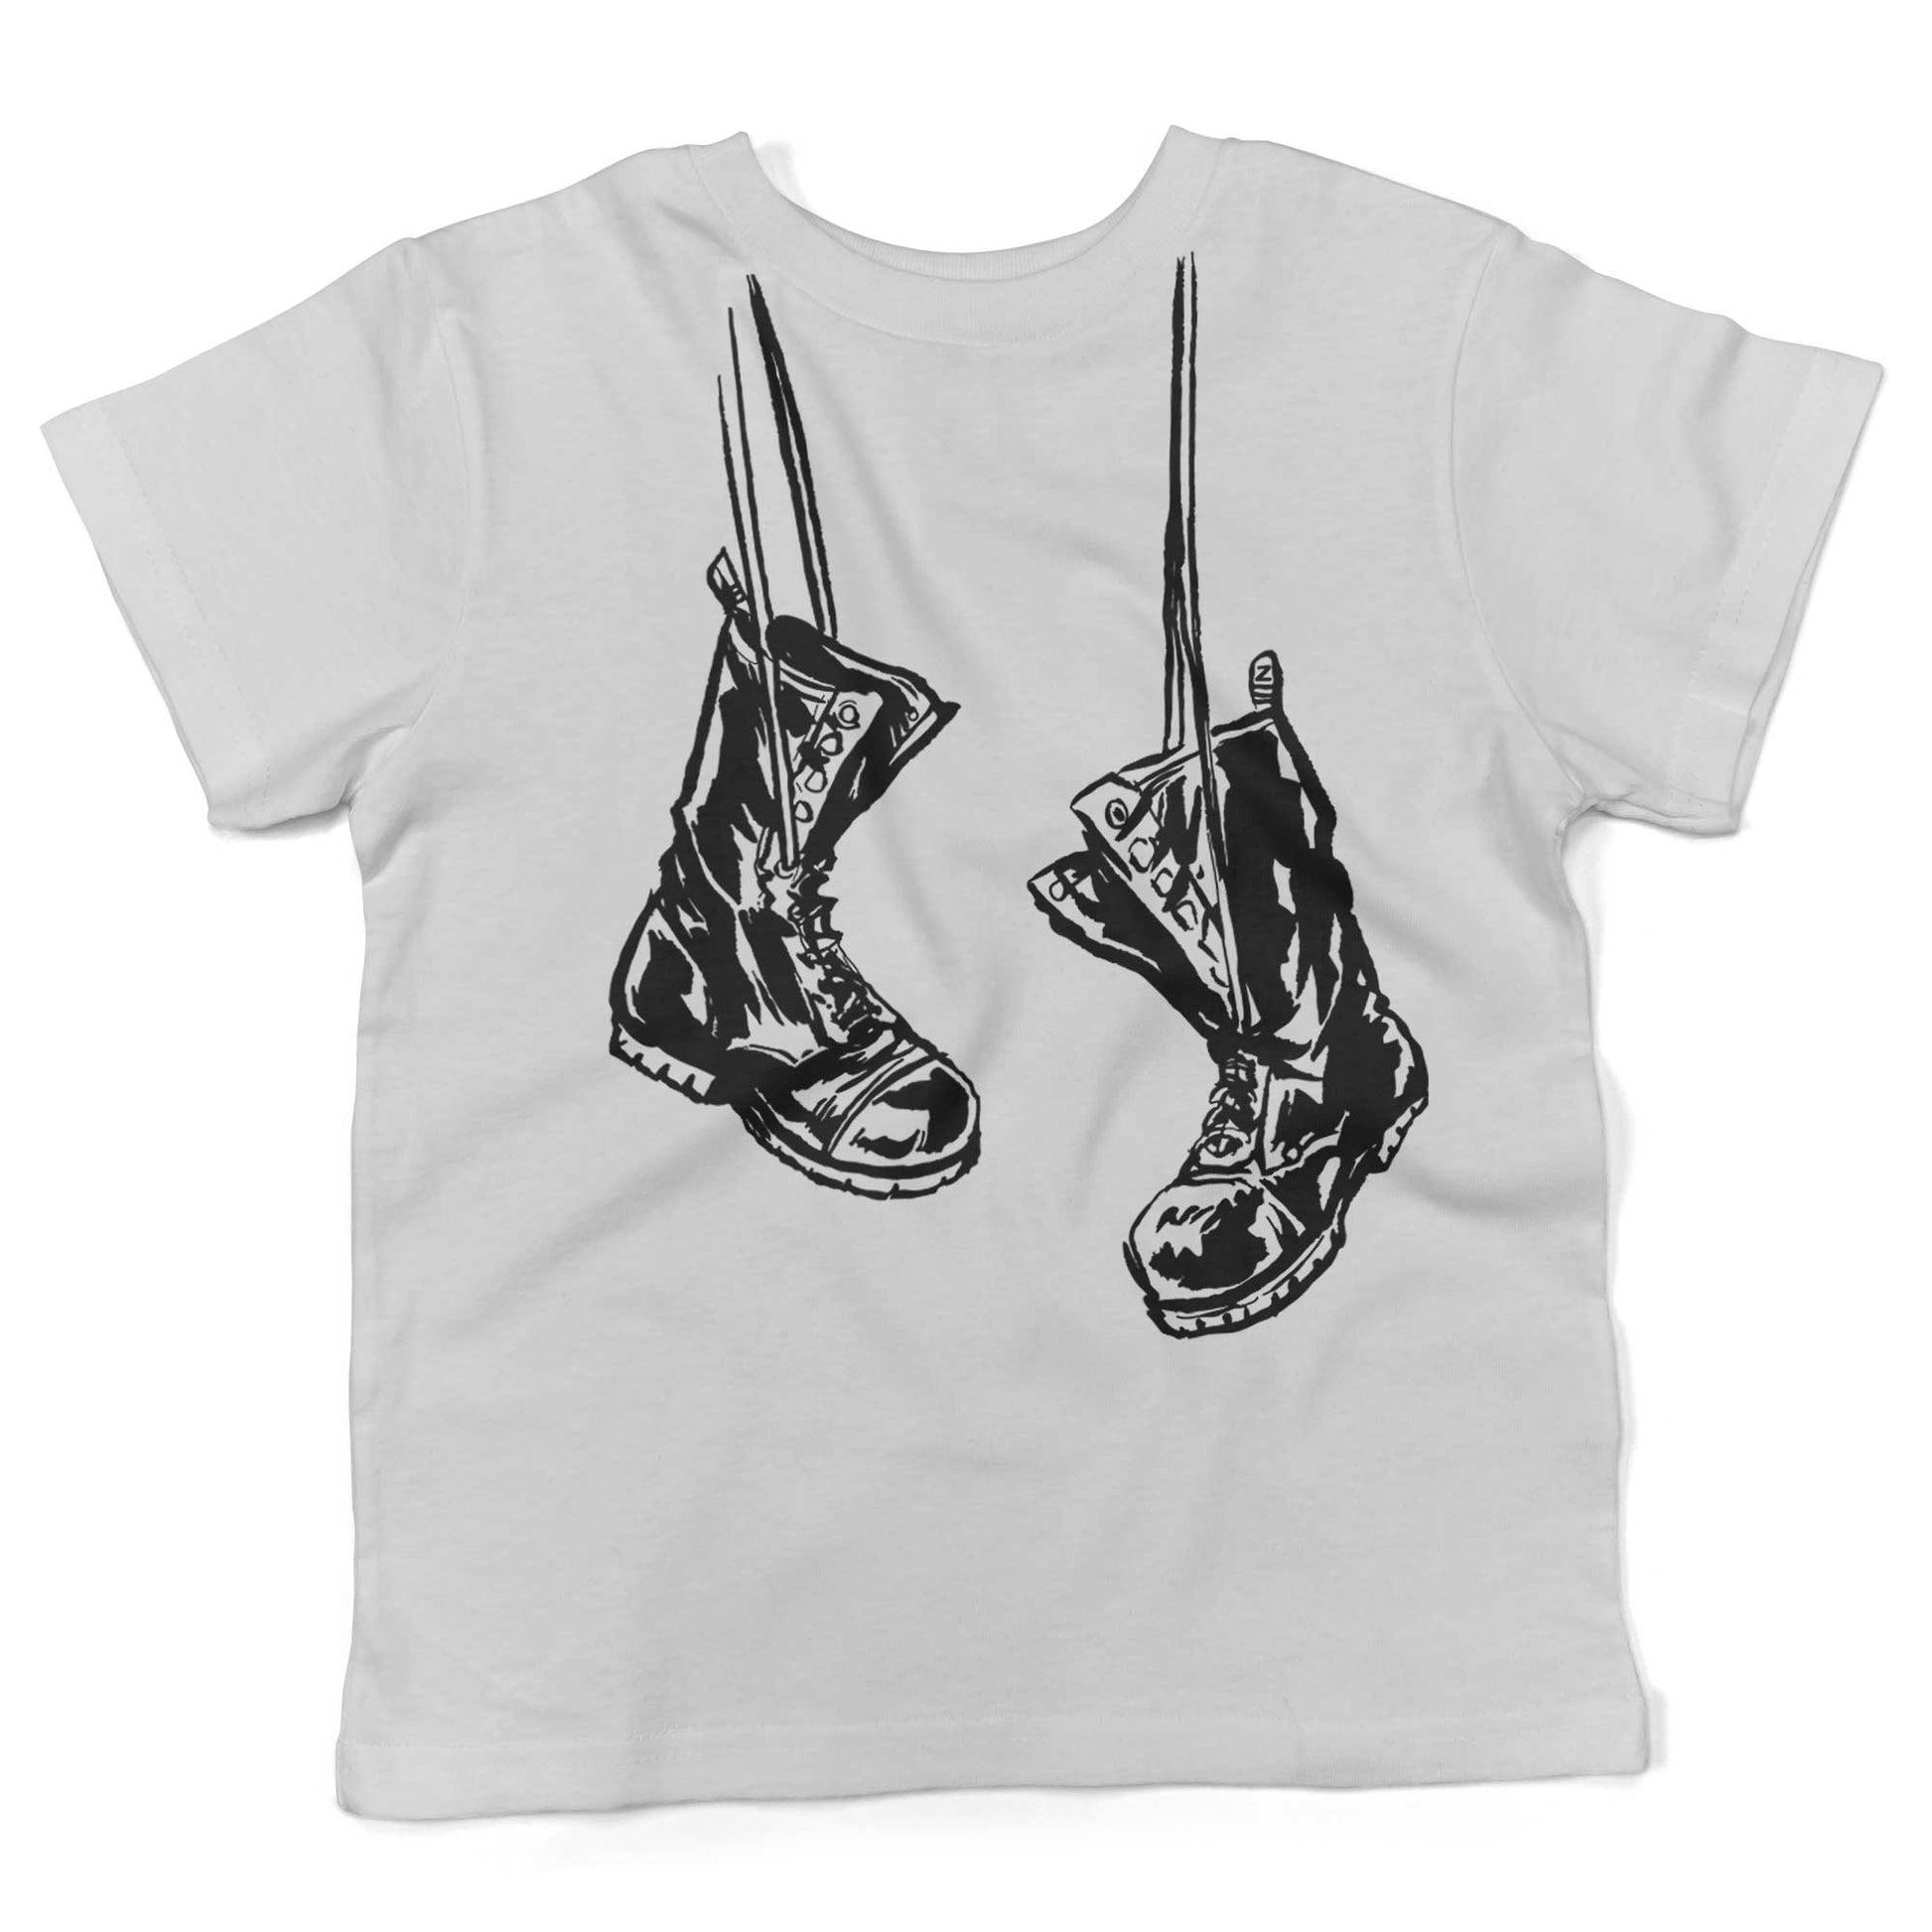 Baby Combat Boots Toddler Shirt-White-2T